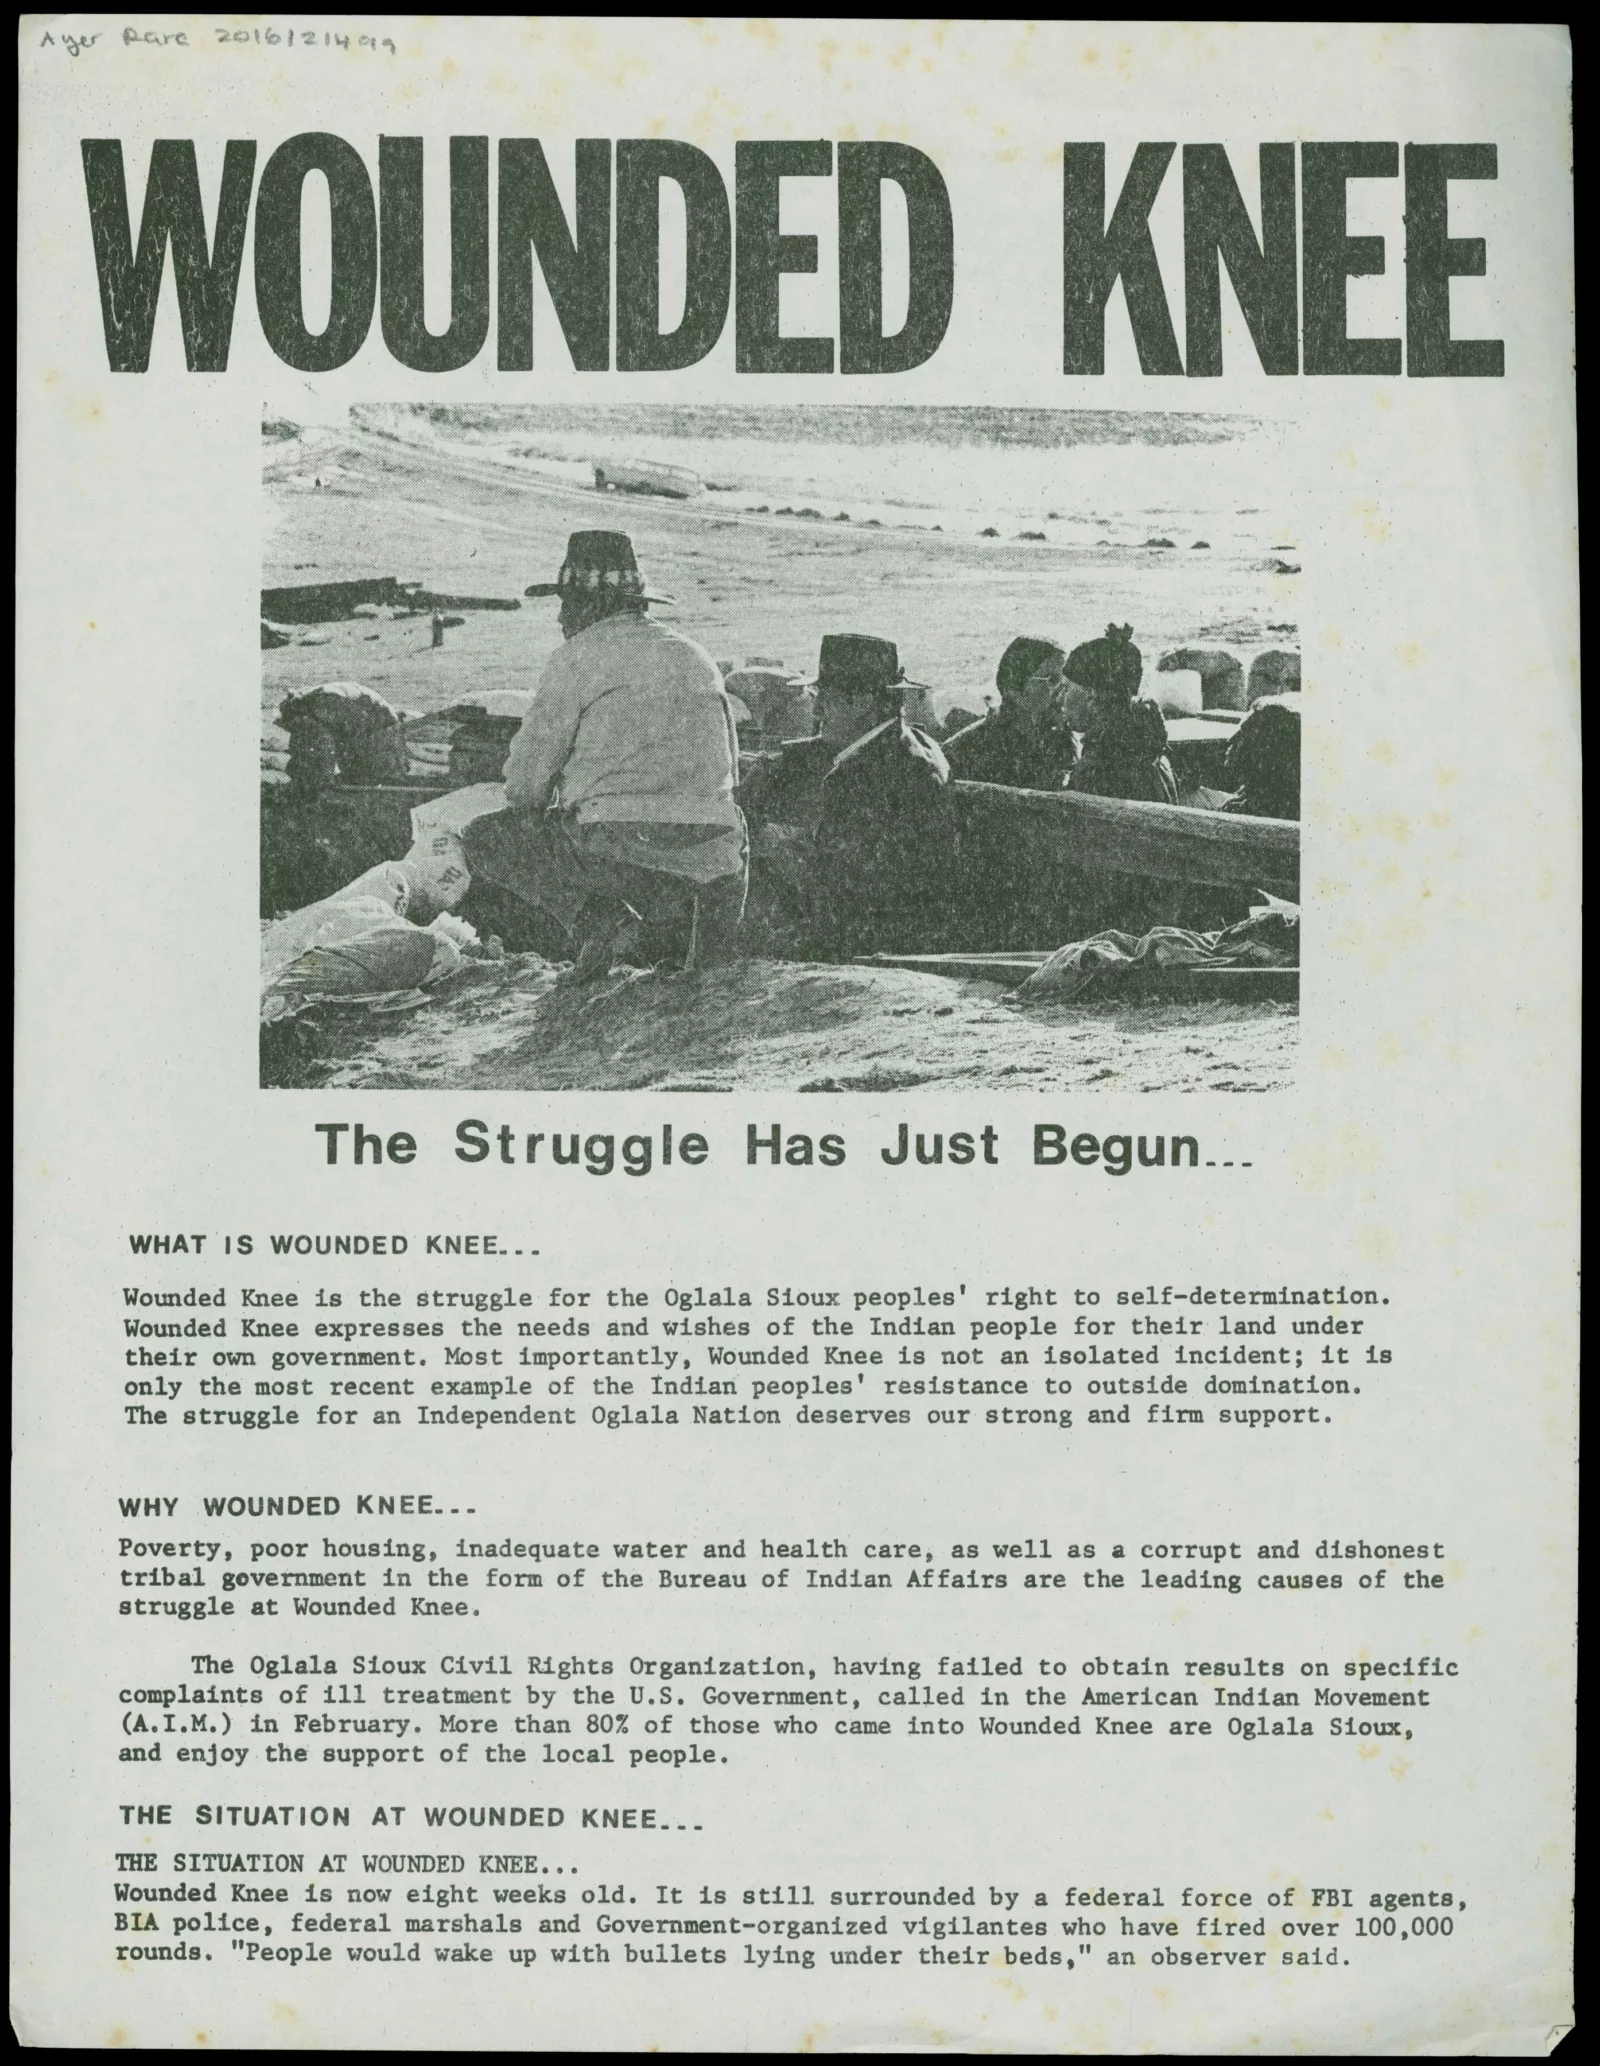 Black and white handbill with "Wounded Knee: The Struggle Has Just Begun..." at the top. An image of Oglala protestors is underneath the title.